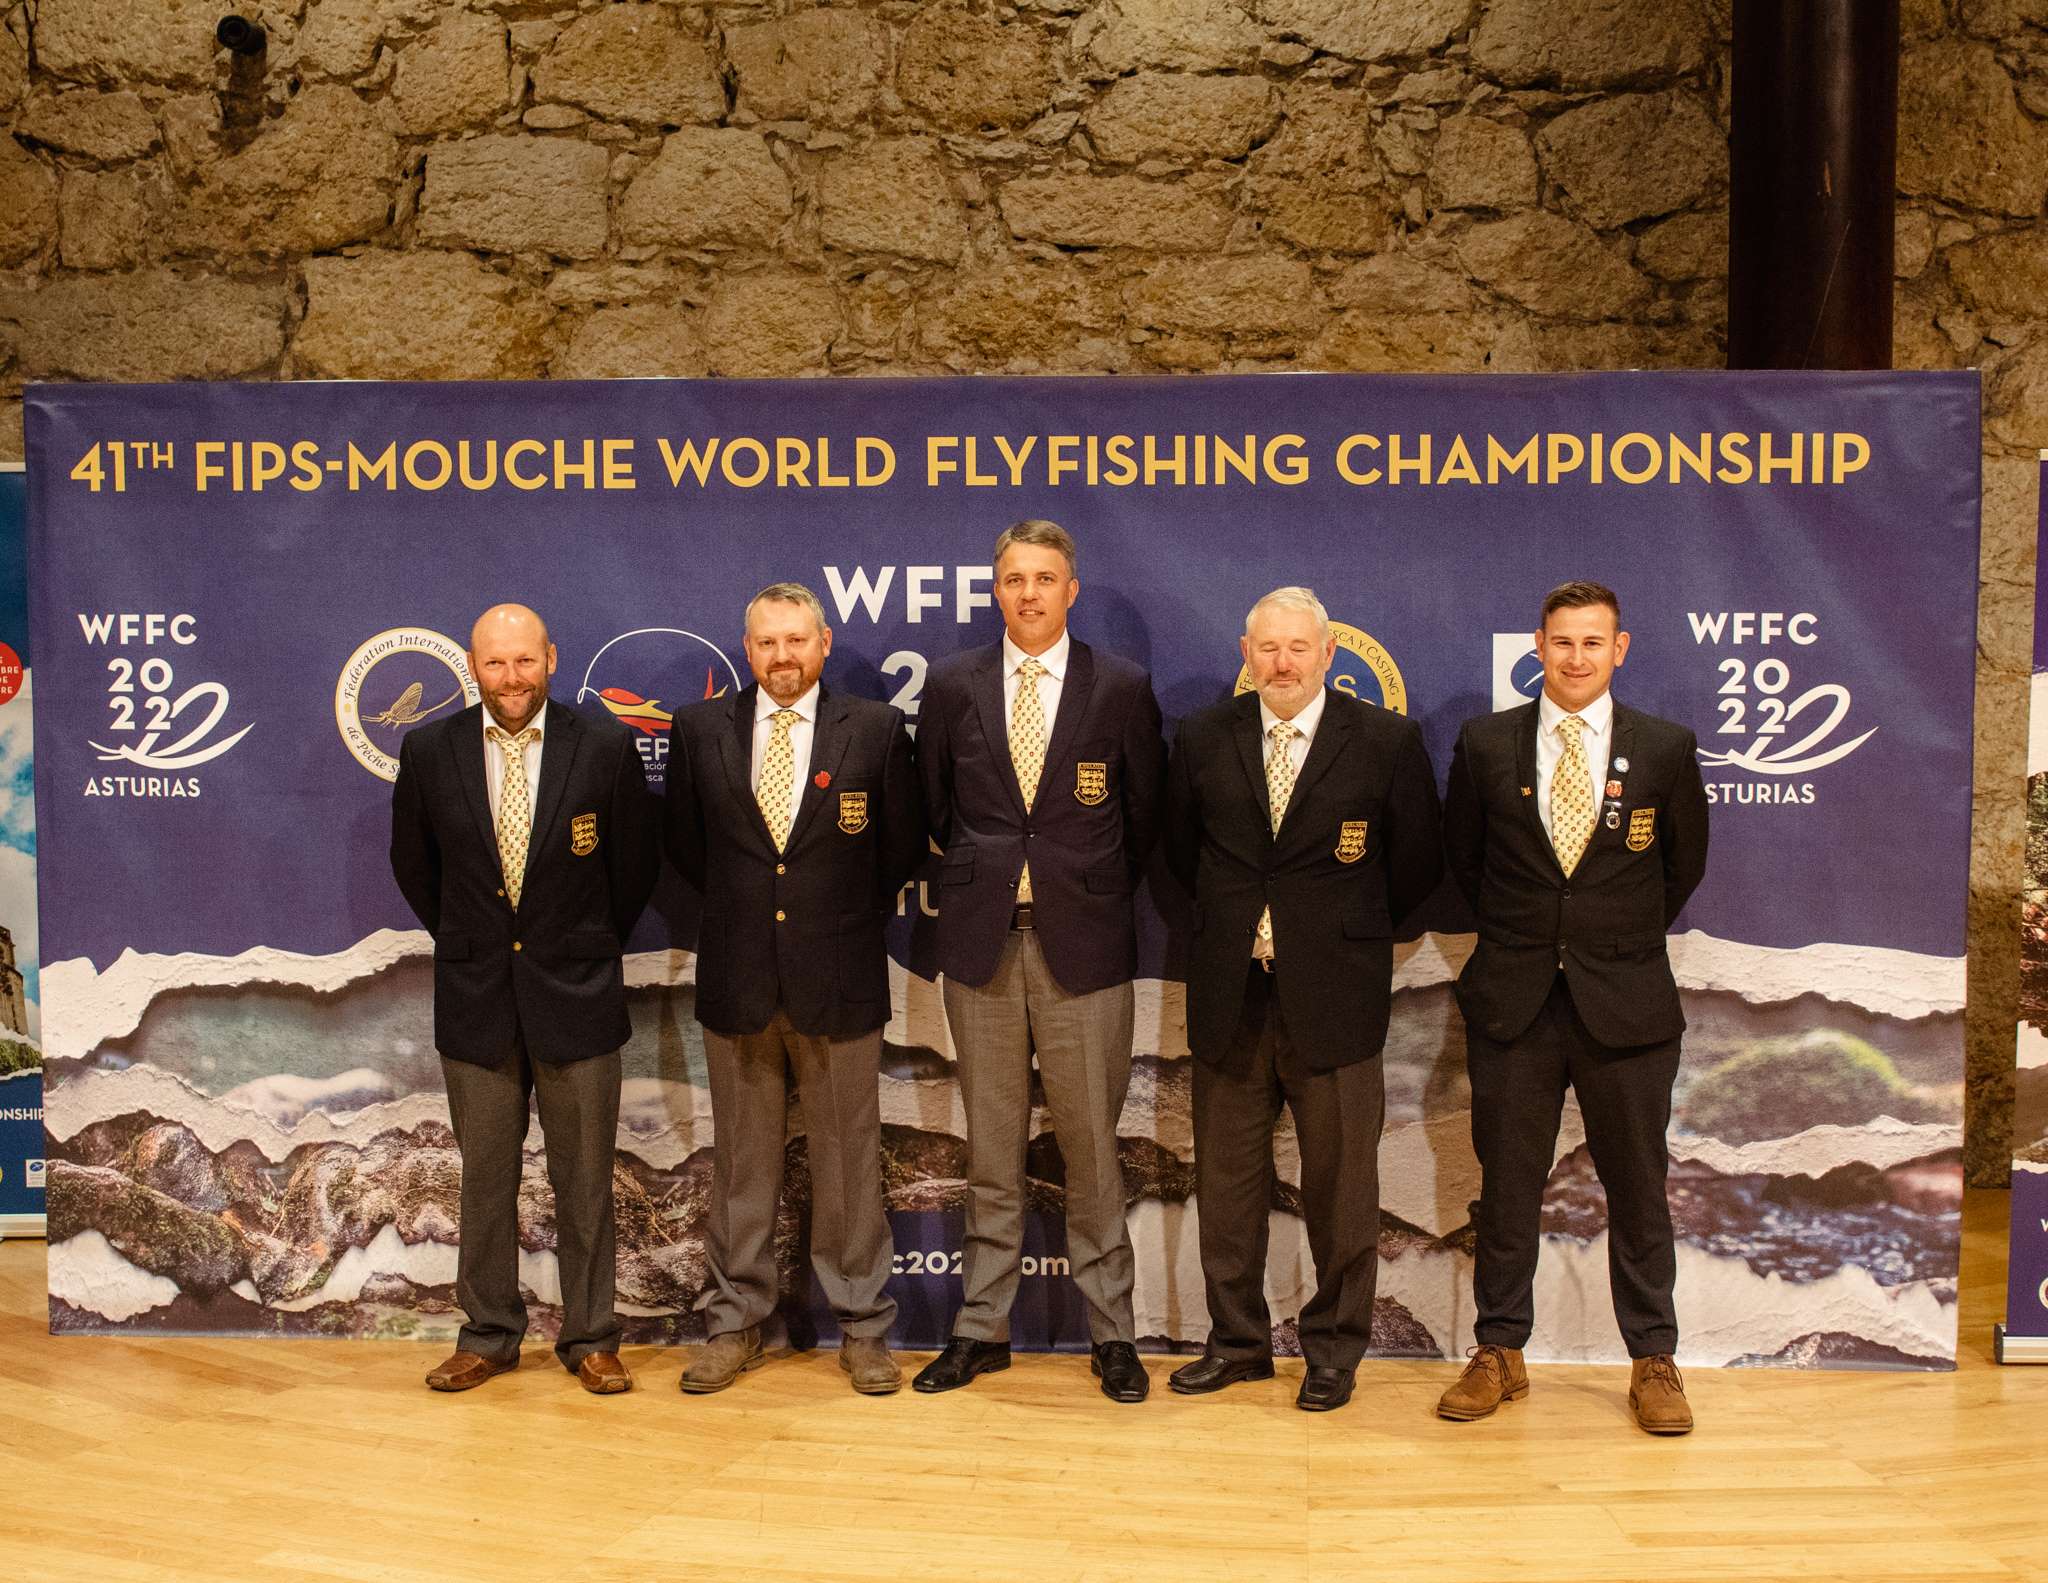 14-facts-about-world-fly-fishing-championship